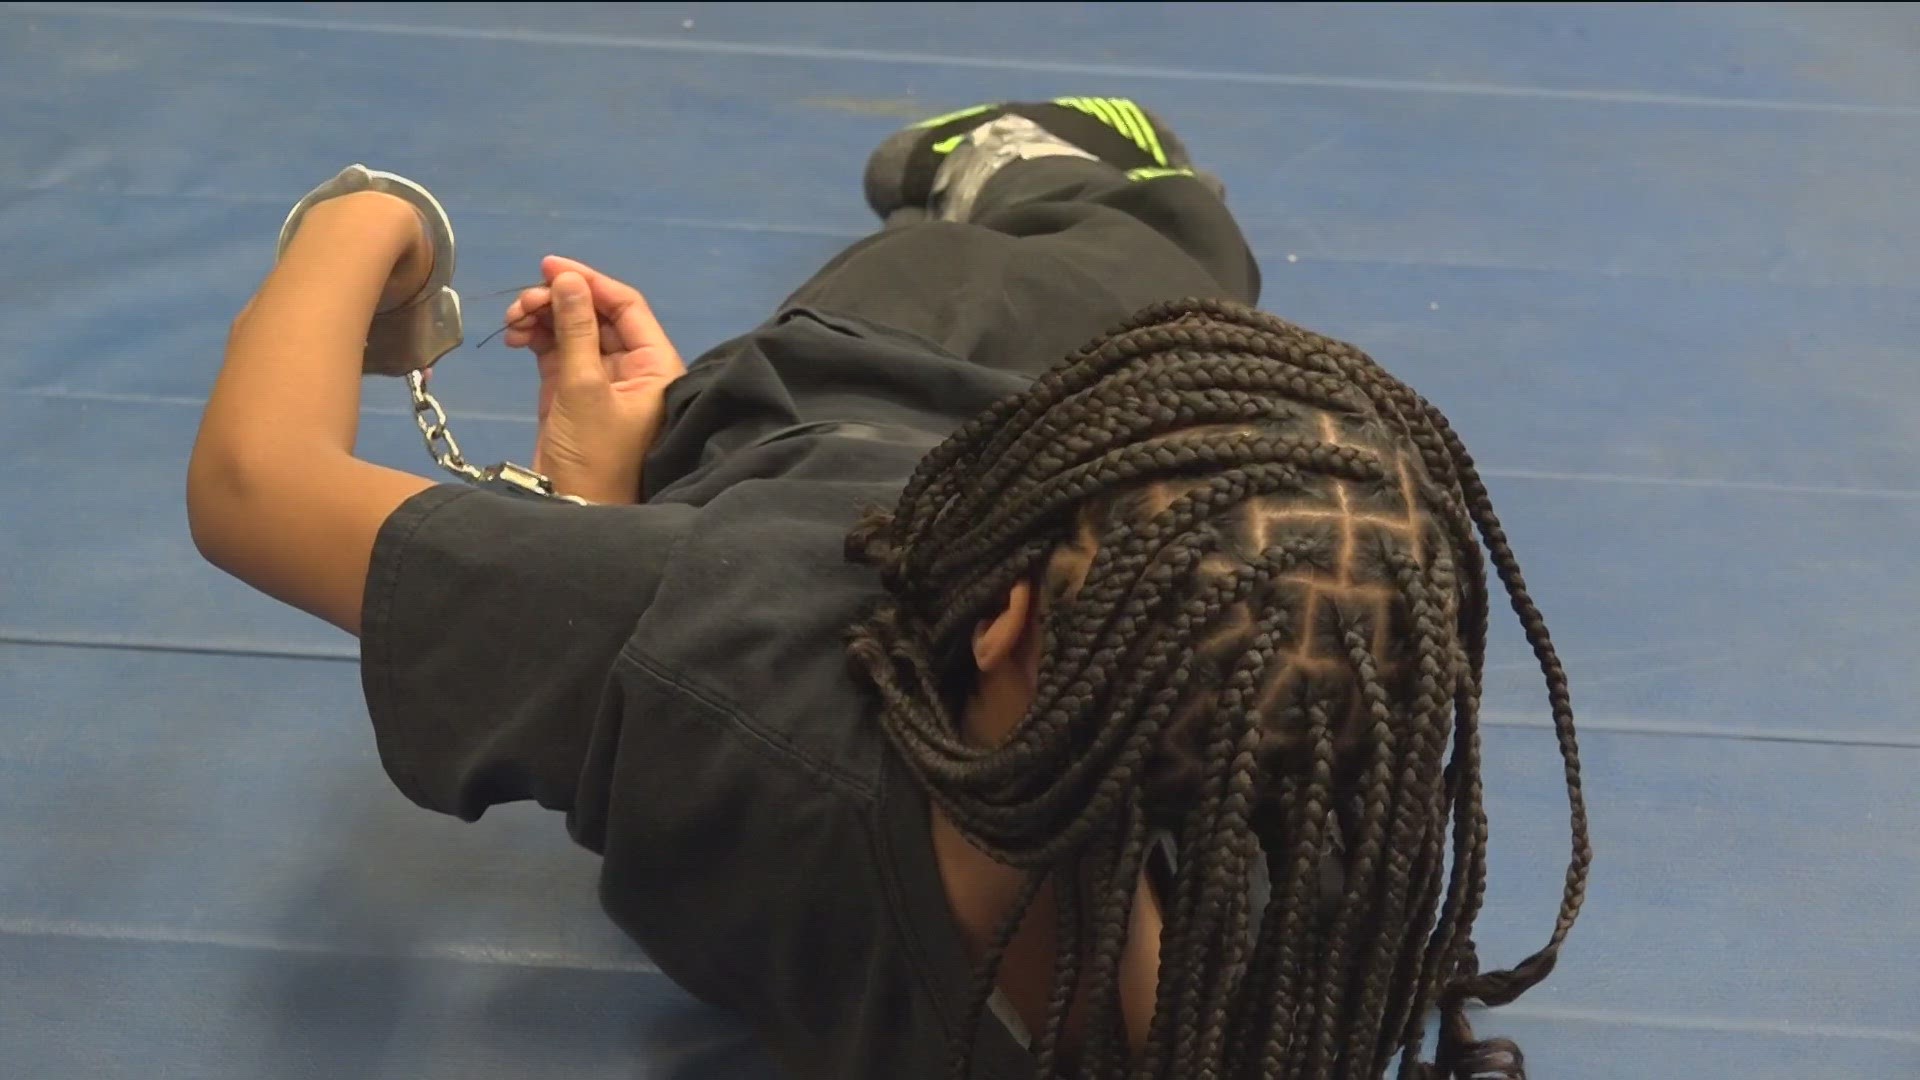 Toledo kids are taking safety into their own hands, joining 3N Combat and Survival at the Frederick Douglass Community Center to learn self-defense and preservation.